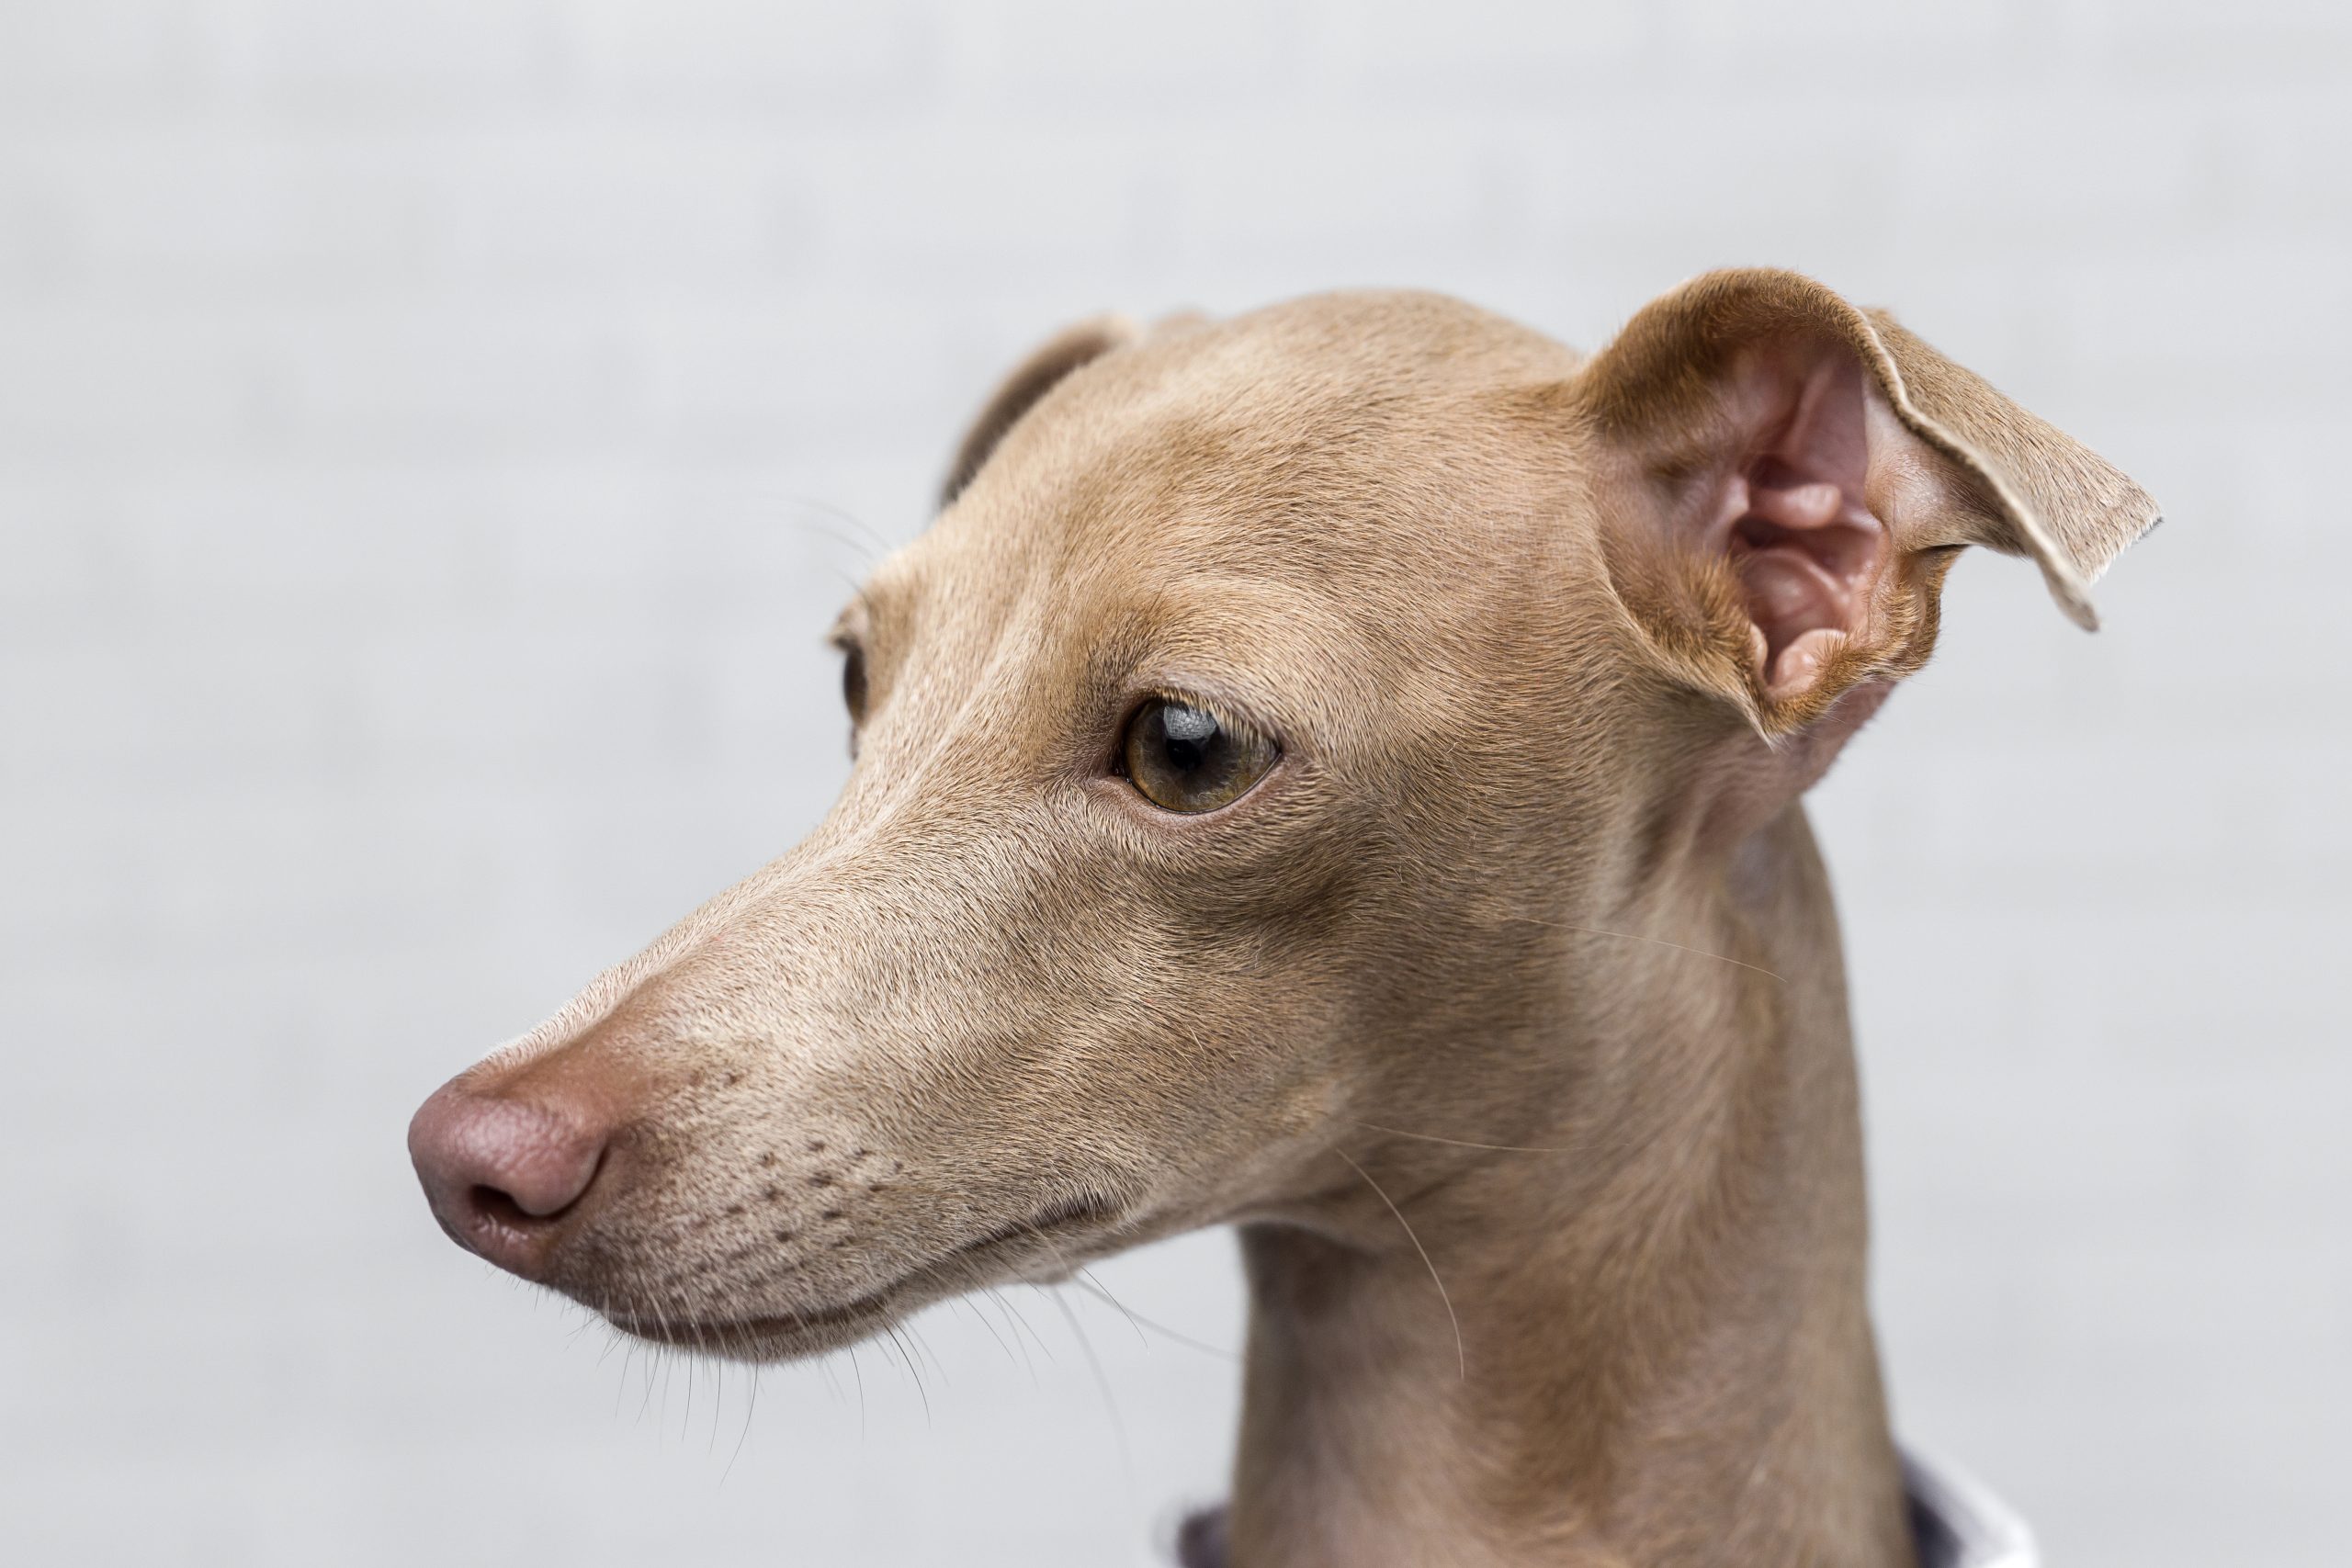 Hematomas in dogs form between the layers of tissue in the ear flap and can cause discomfort in your dogs.